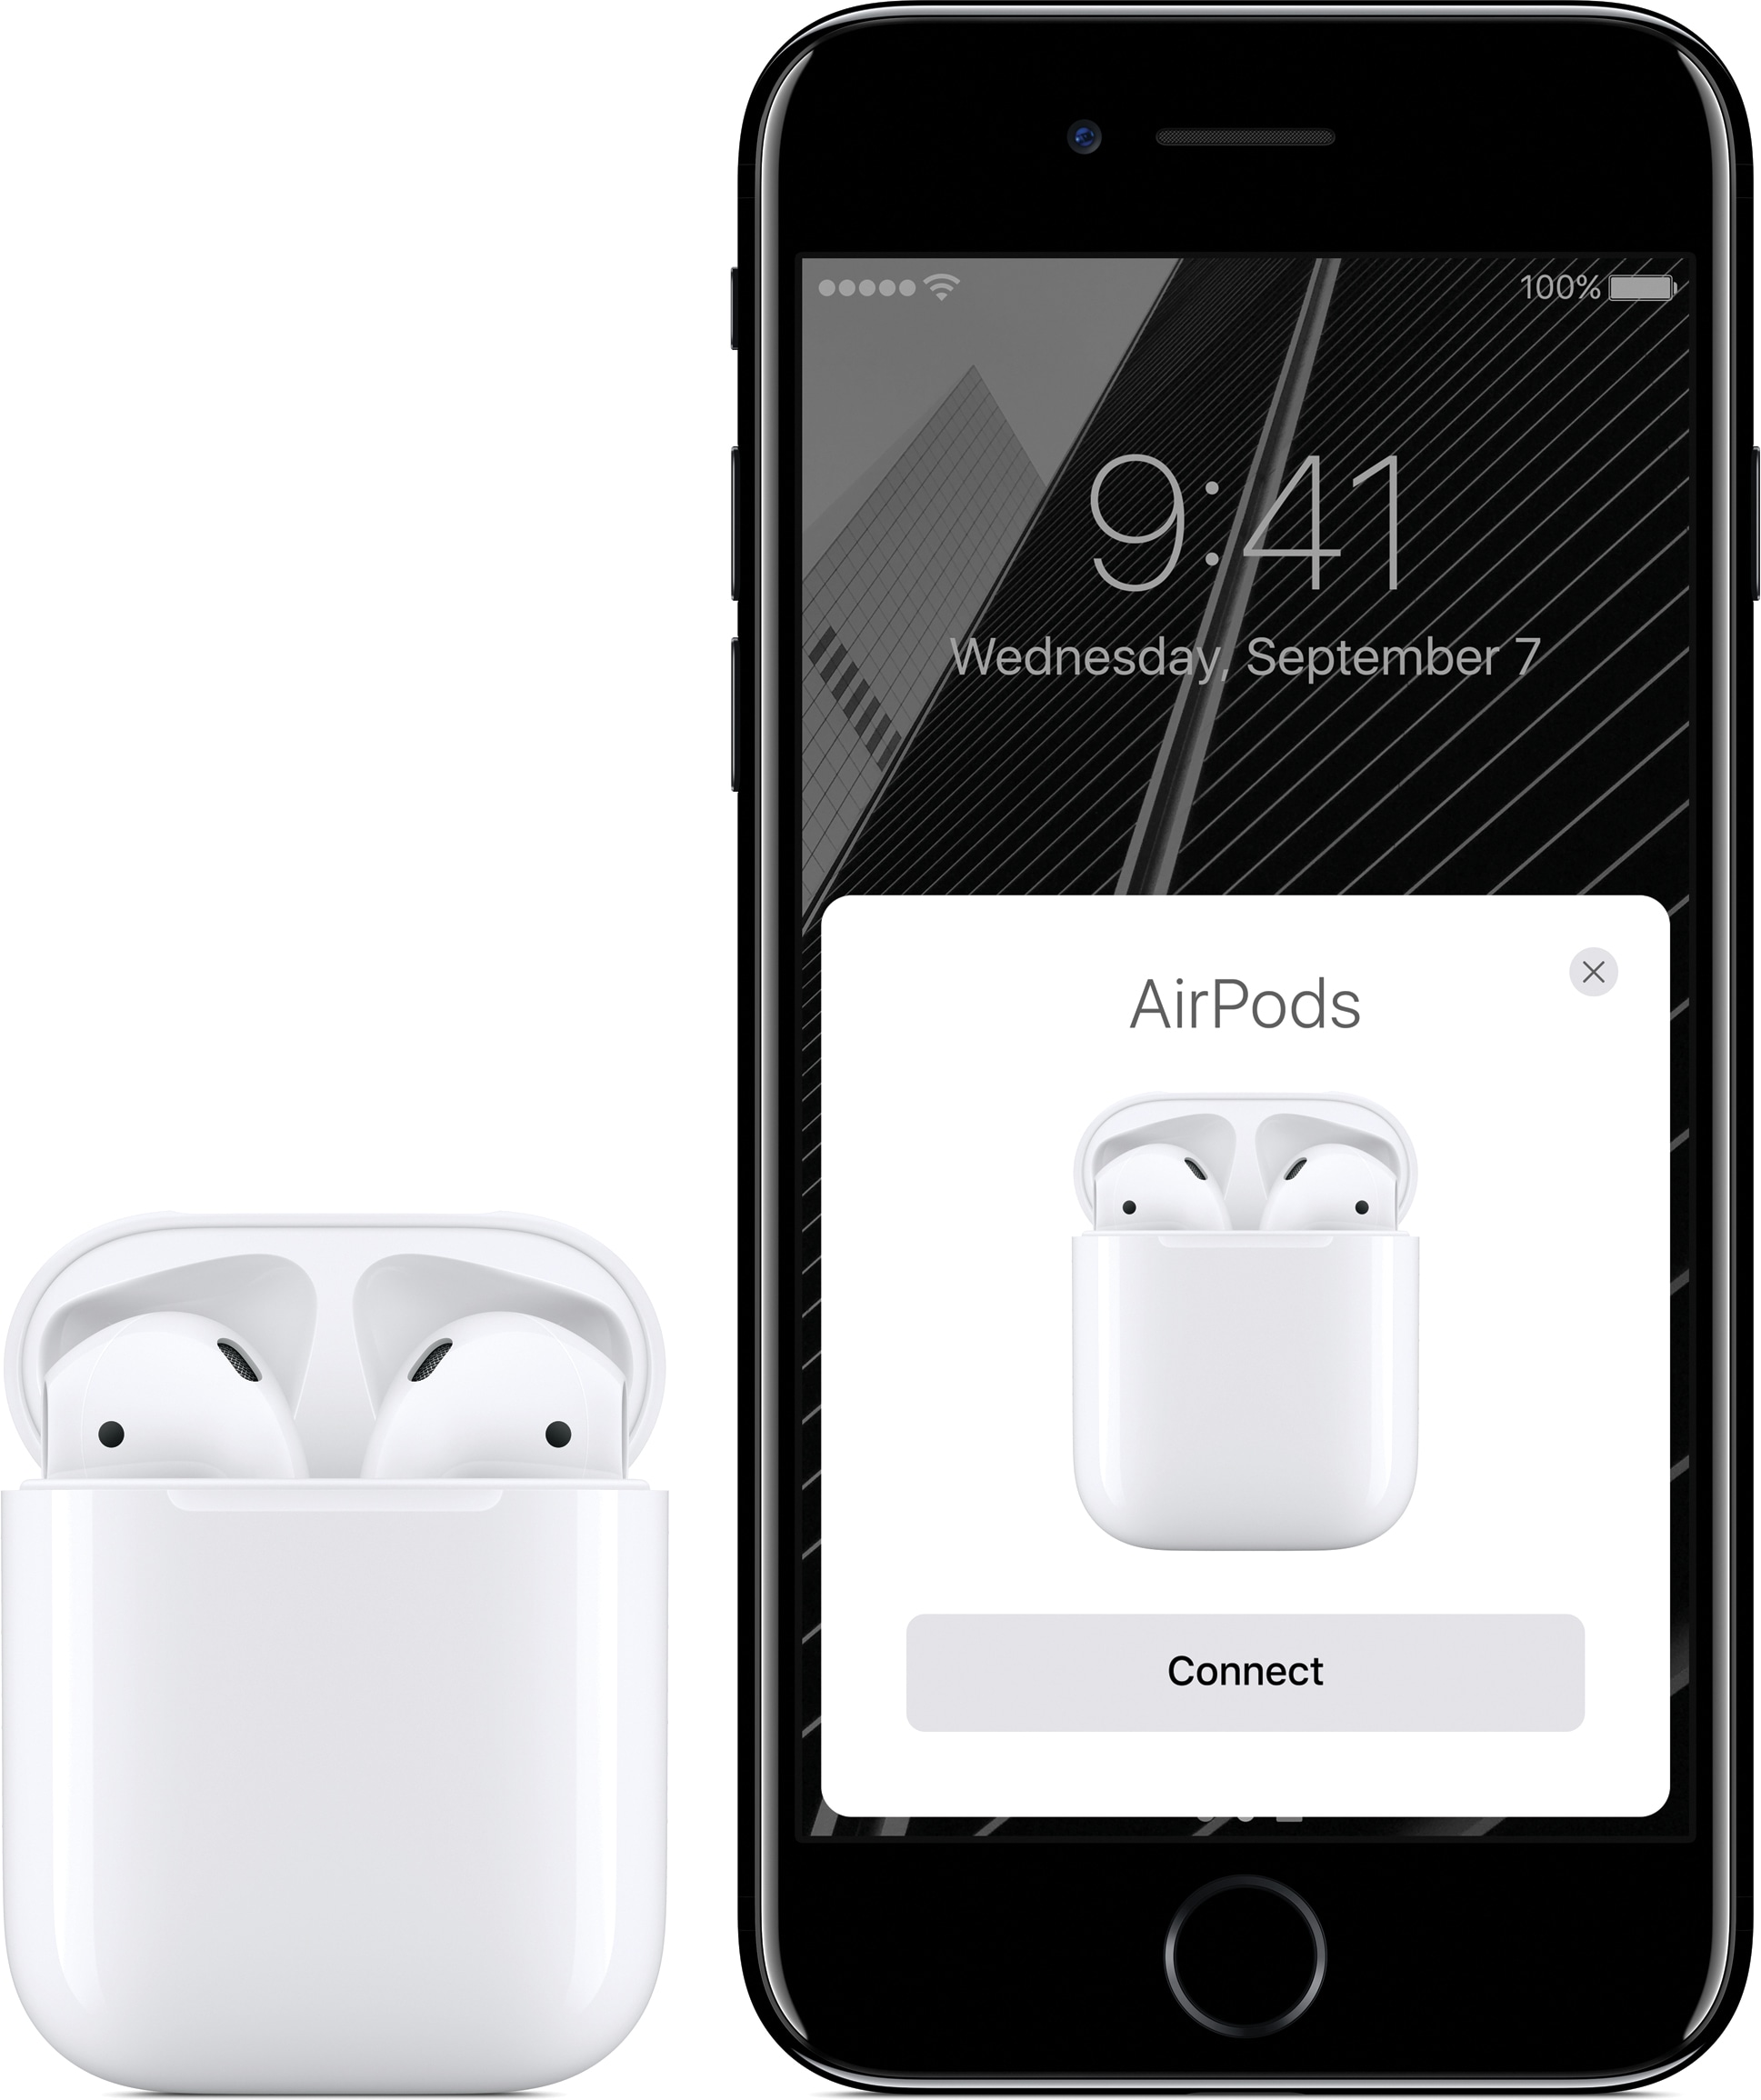 AirPods in the box next to iPhone 7 with pairing screen